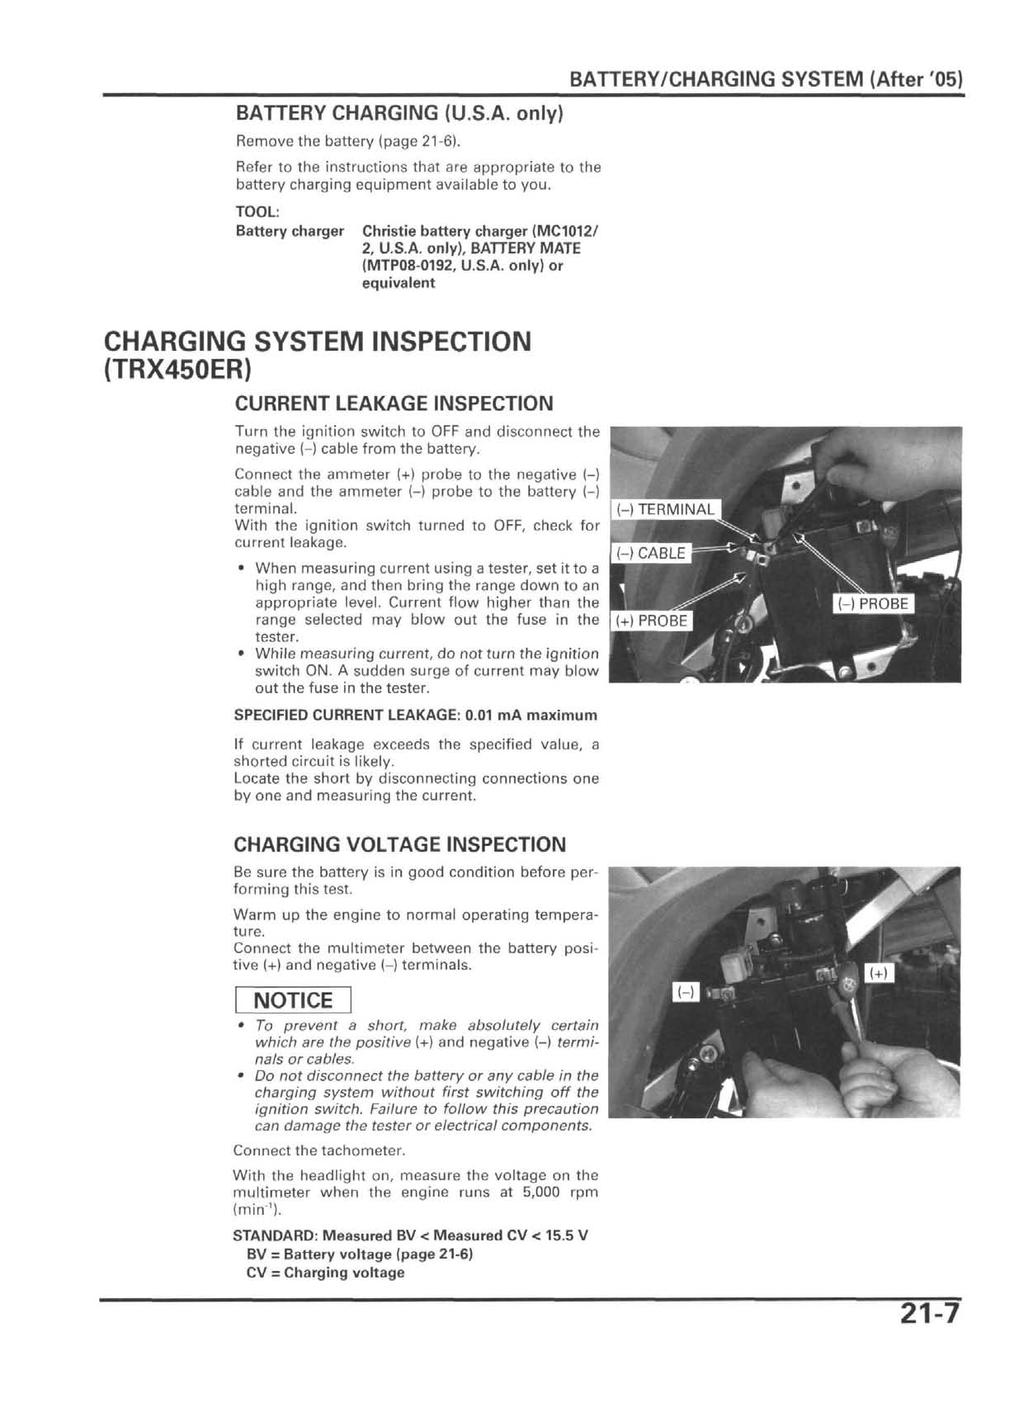 BATTERY CHARGING (U.S.A. only) Remove the battery (page 21-6). Refer to the instructions that are appropriate to the battery charging equipment available to you.